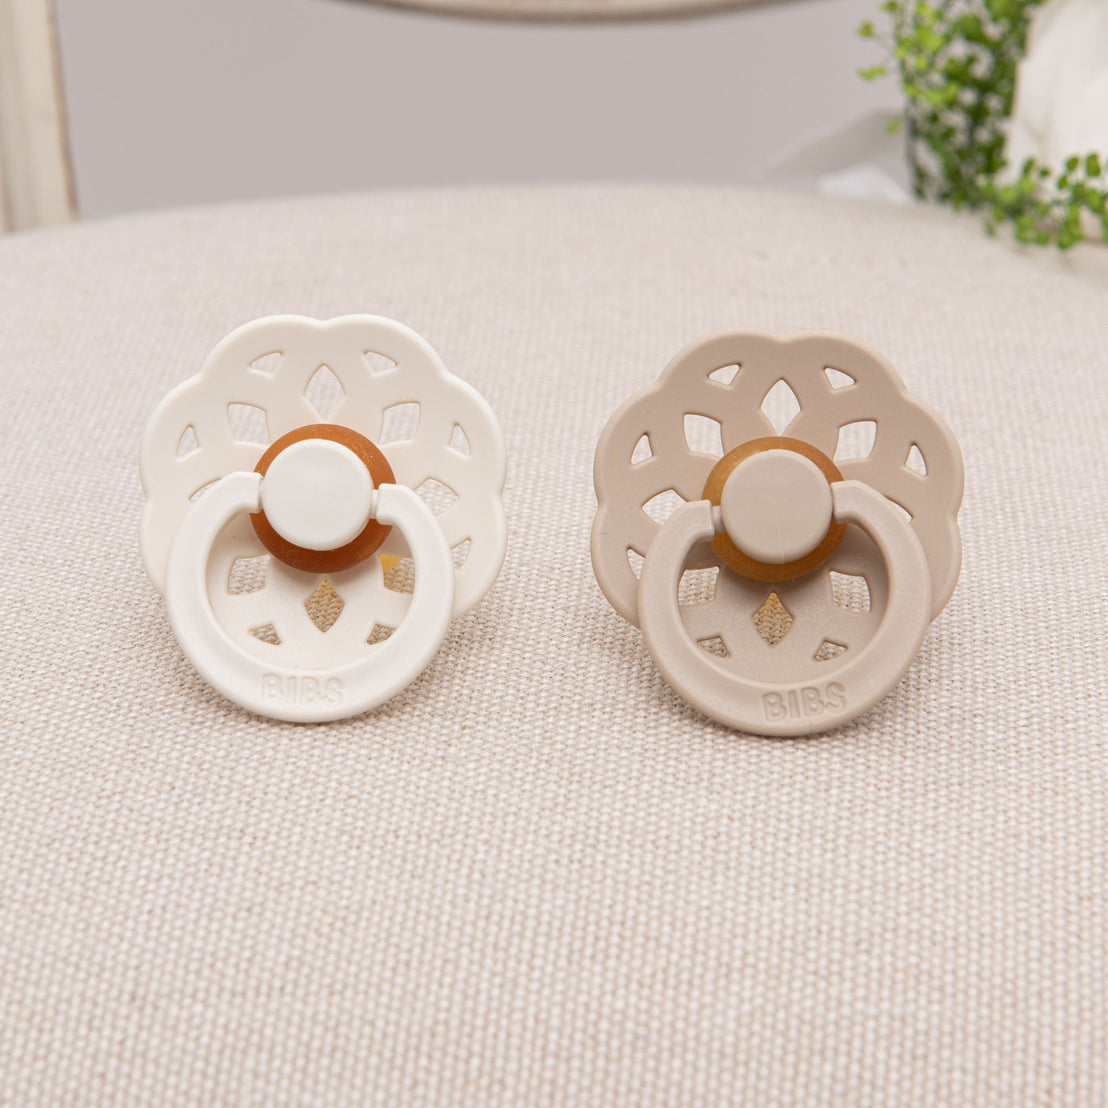 Two bibs pacifiers side by side in 2 colors: ivory and vanilla. 